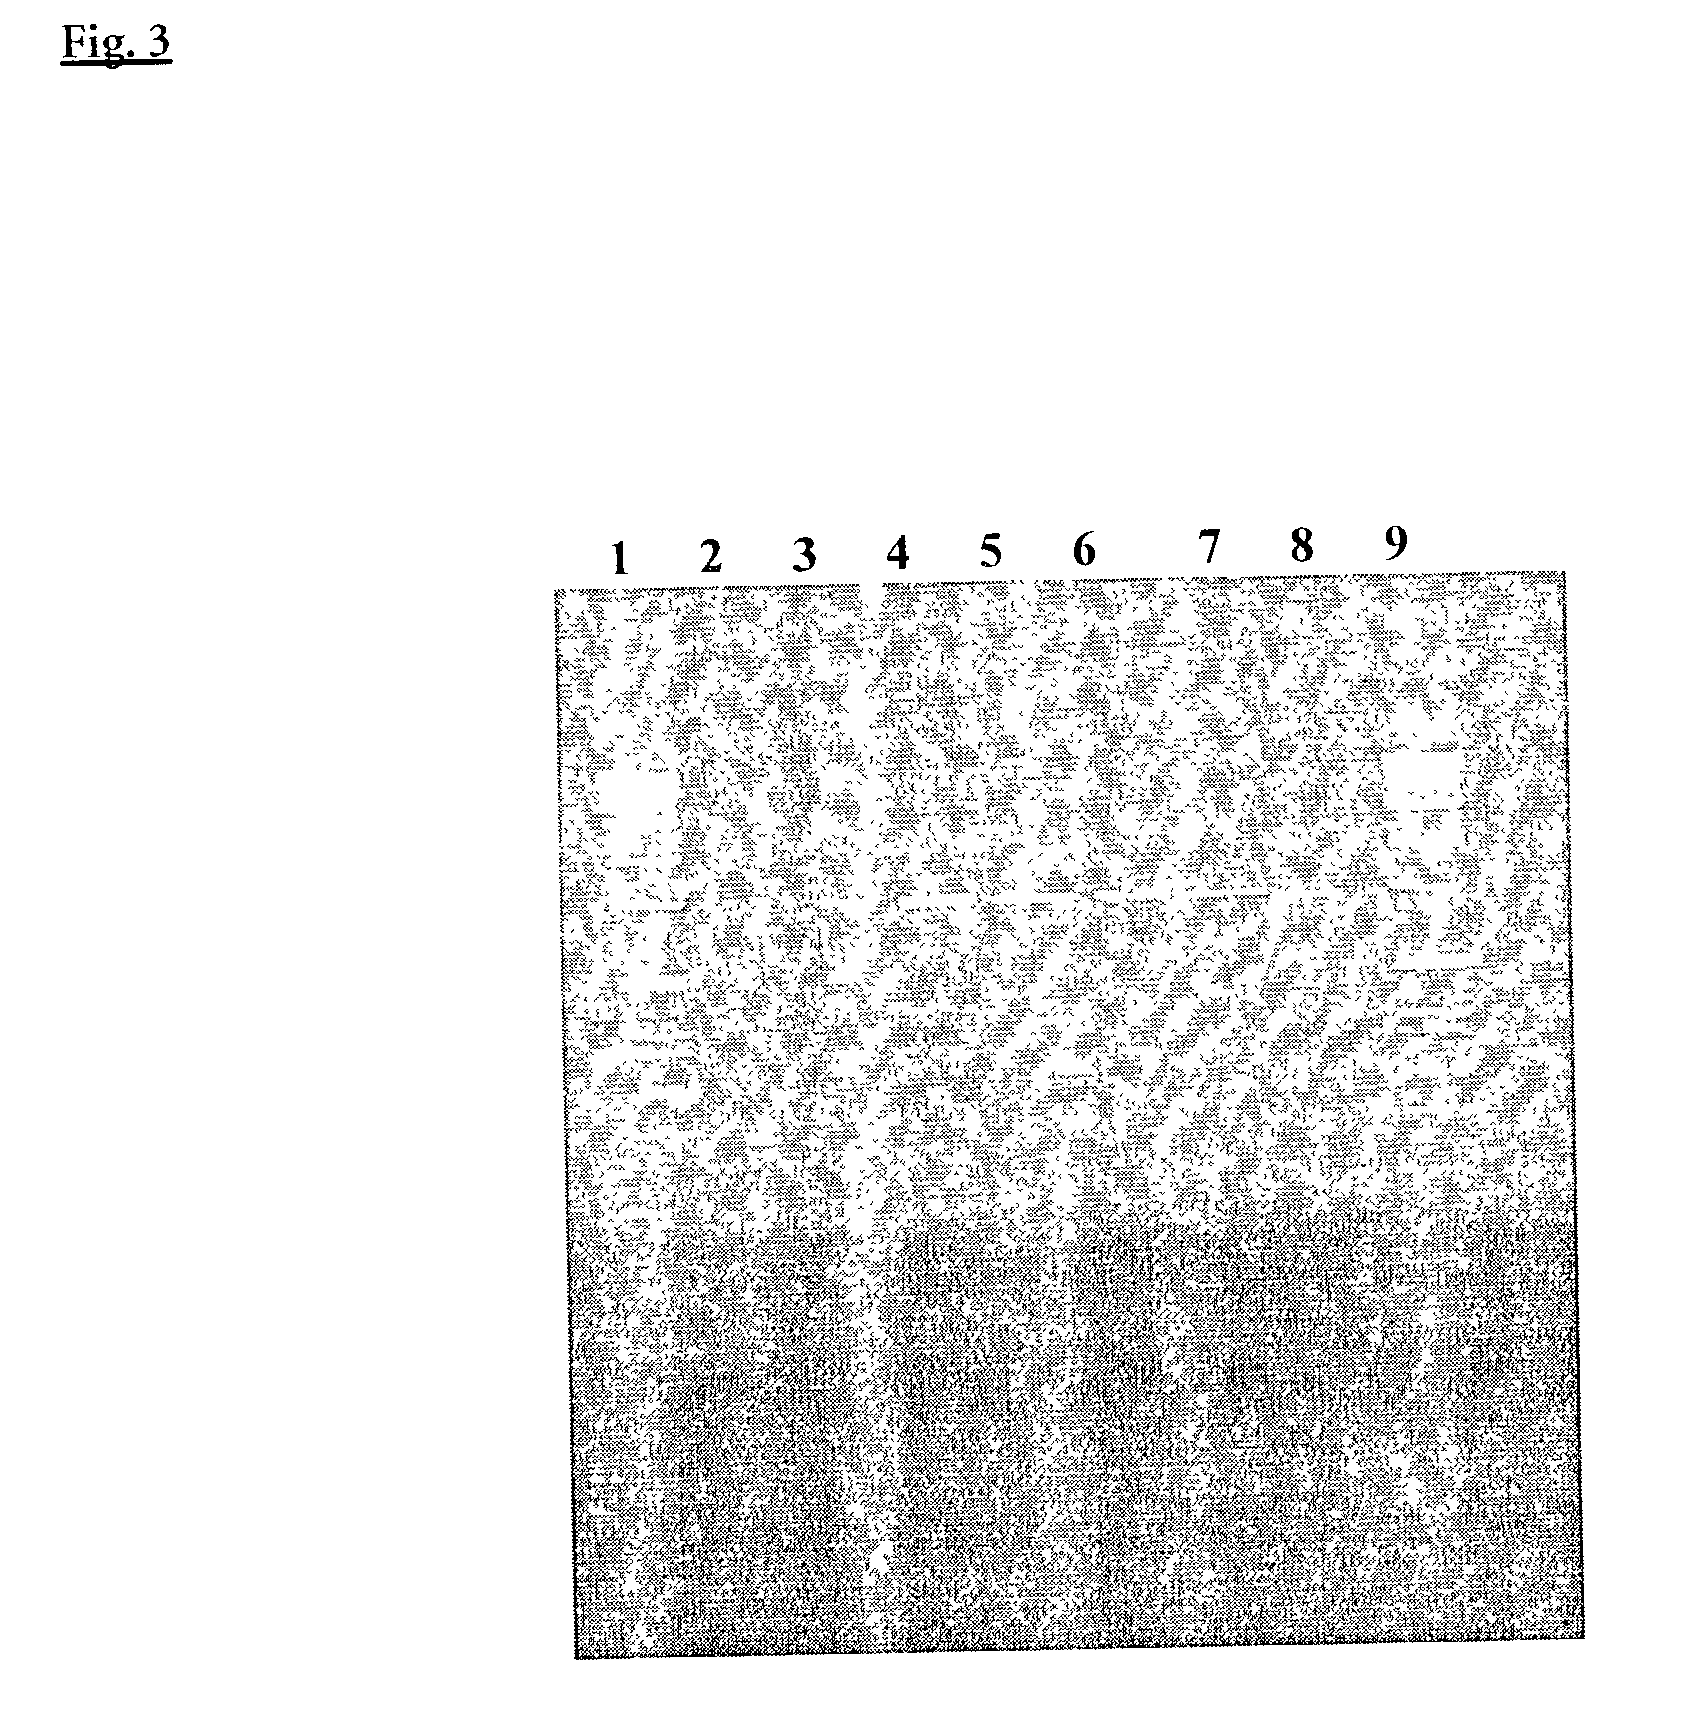 Composition and method for hot start nucleic acid amplification